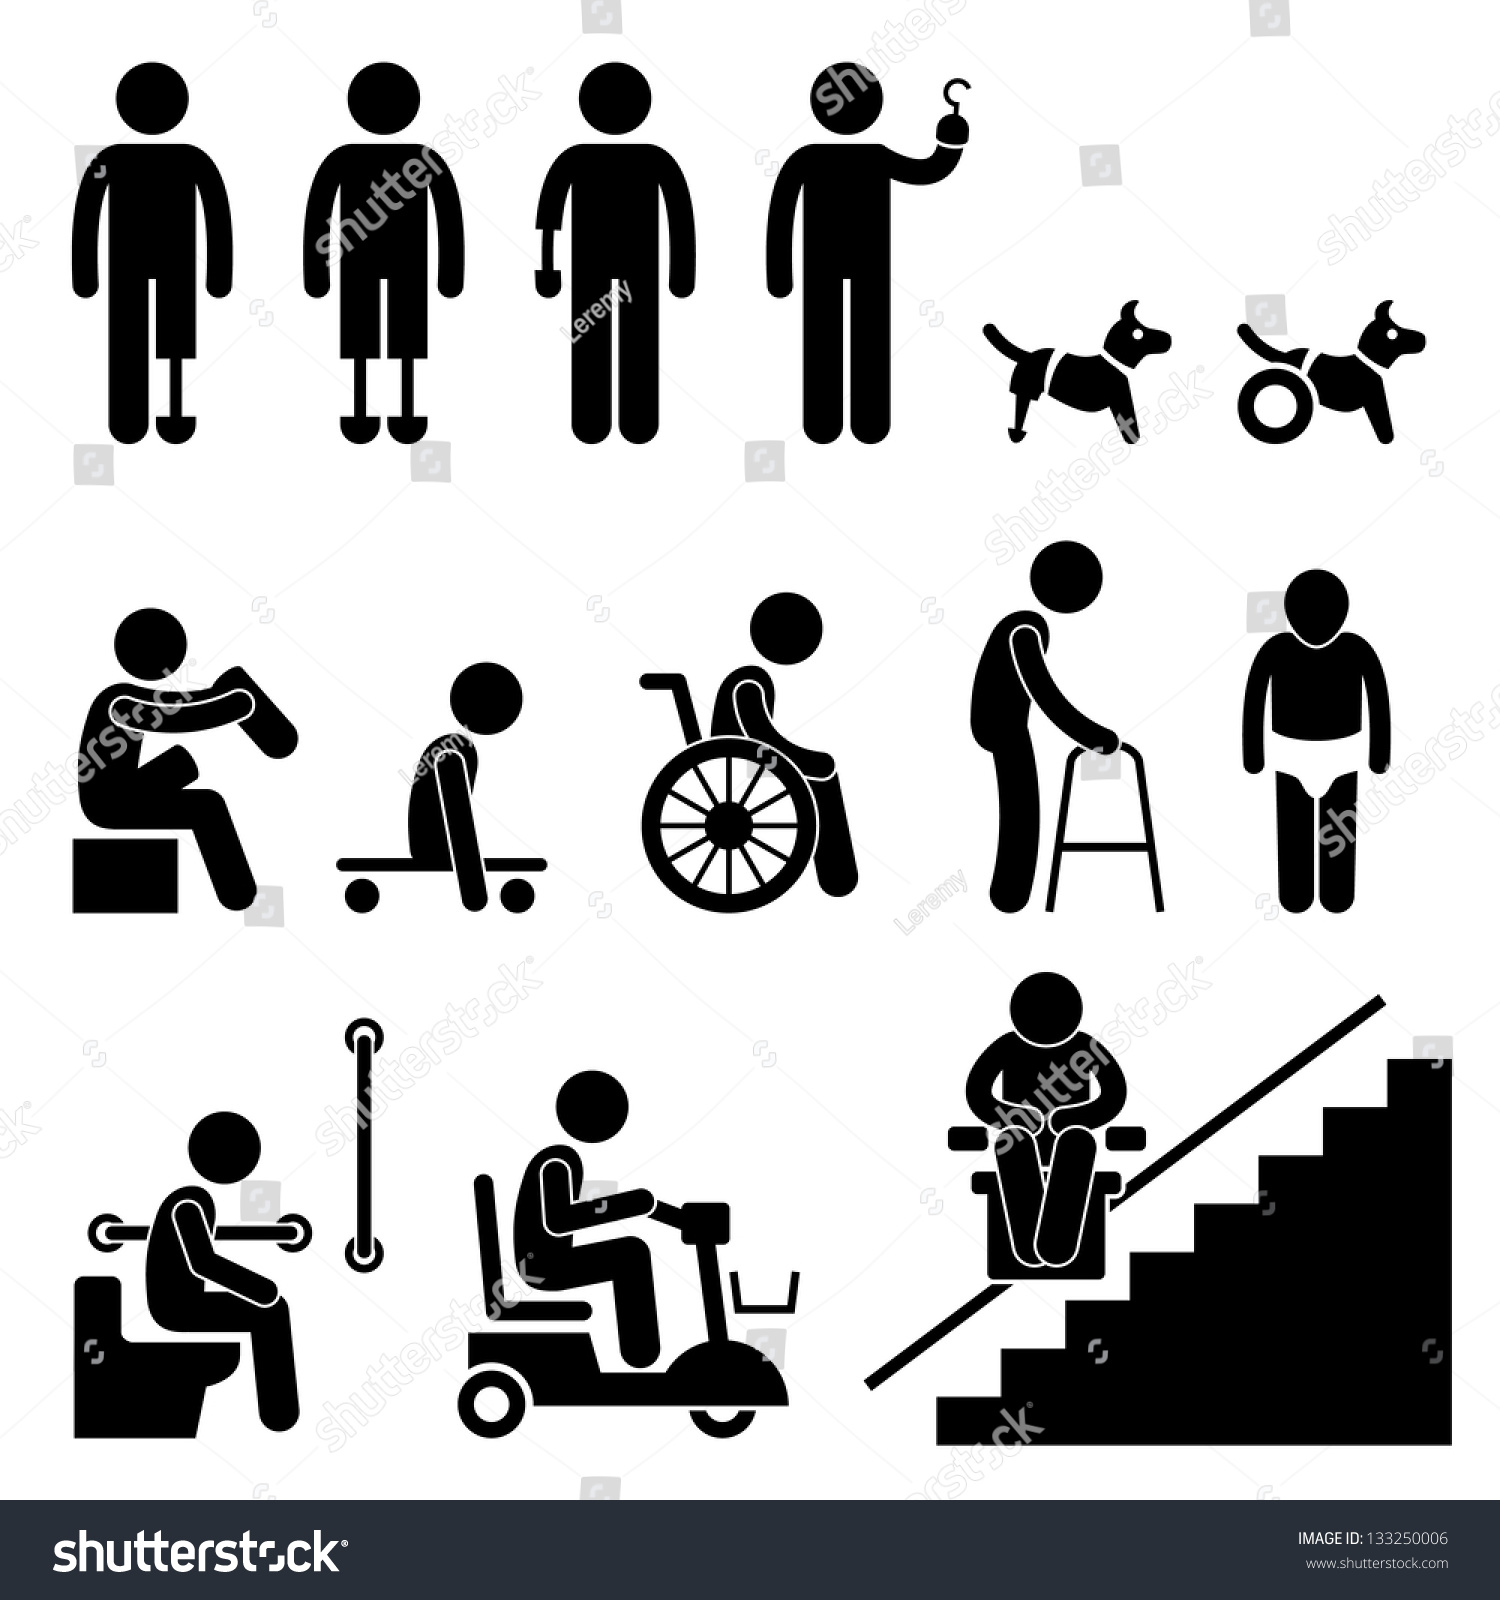 SVG of Amputee Handicap Disable People Man Tool Equipment Stick Figure Pictogram Icon svg